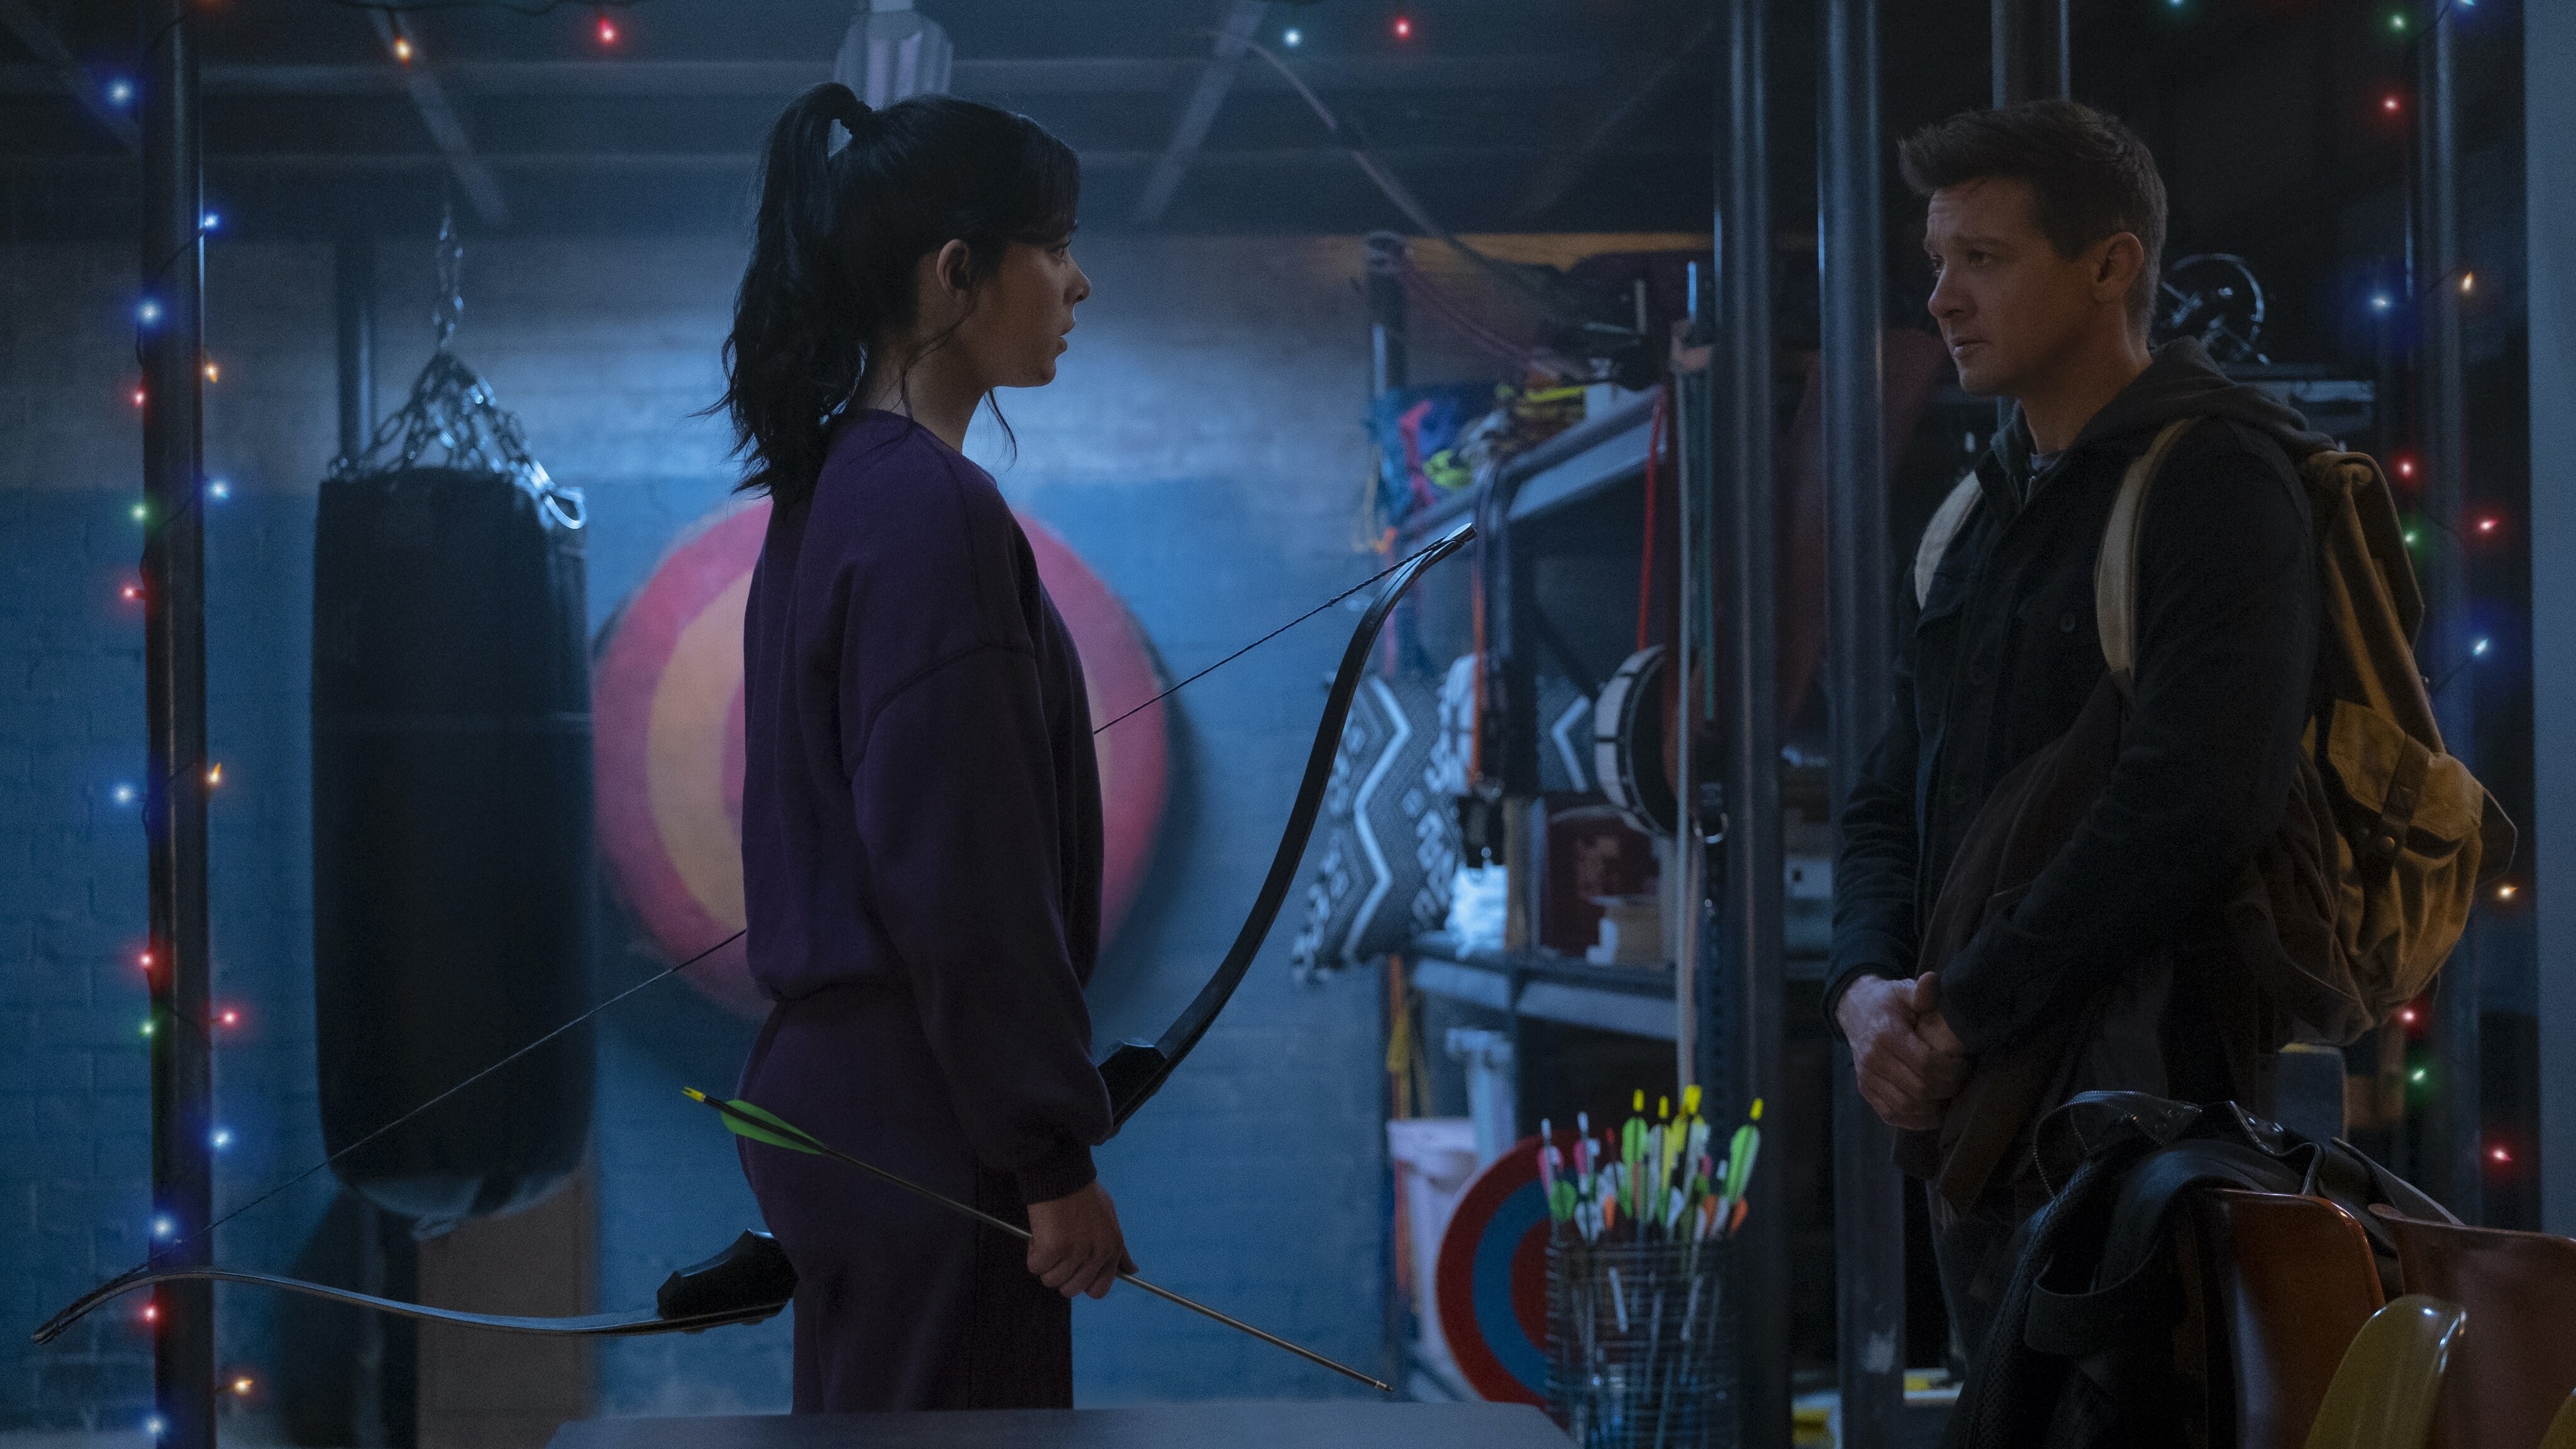 Disney+ Debuts Official Trailer And Teaser Poster For Marvel Studios’ “Hawkeye”